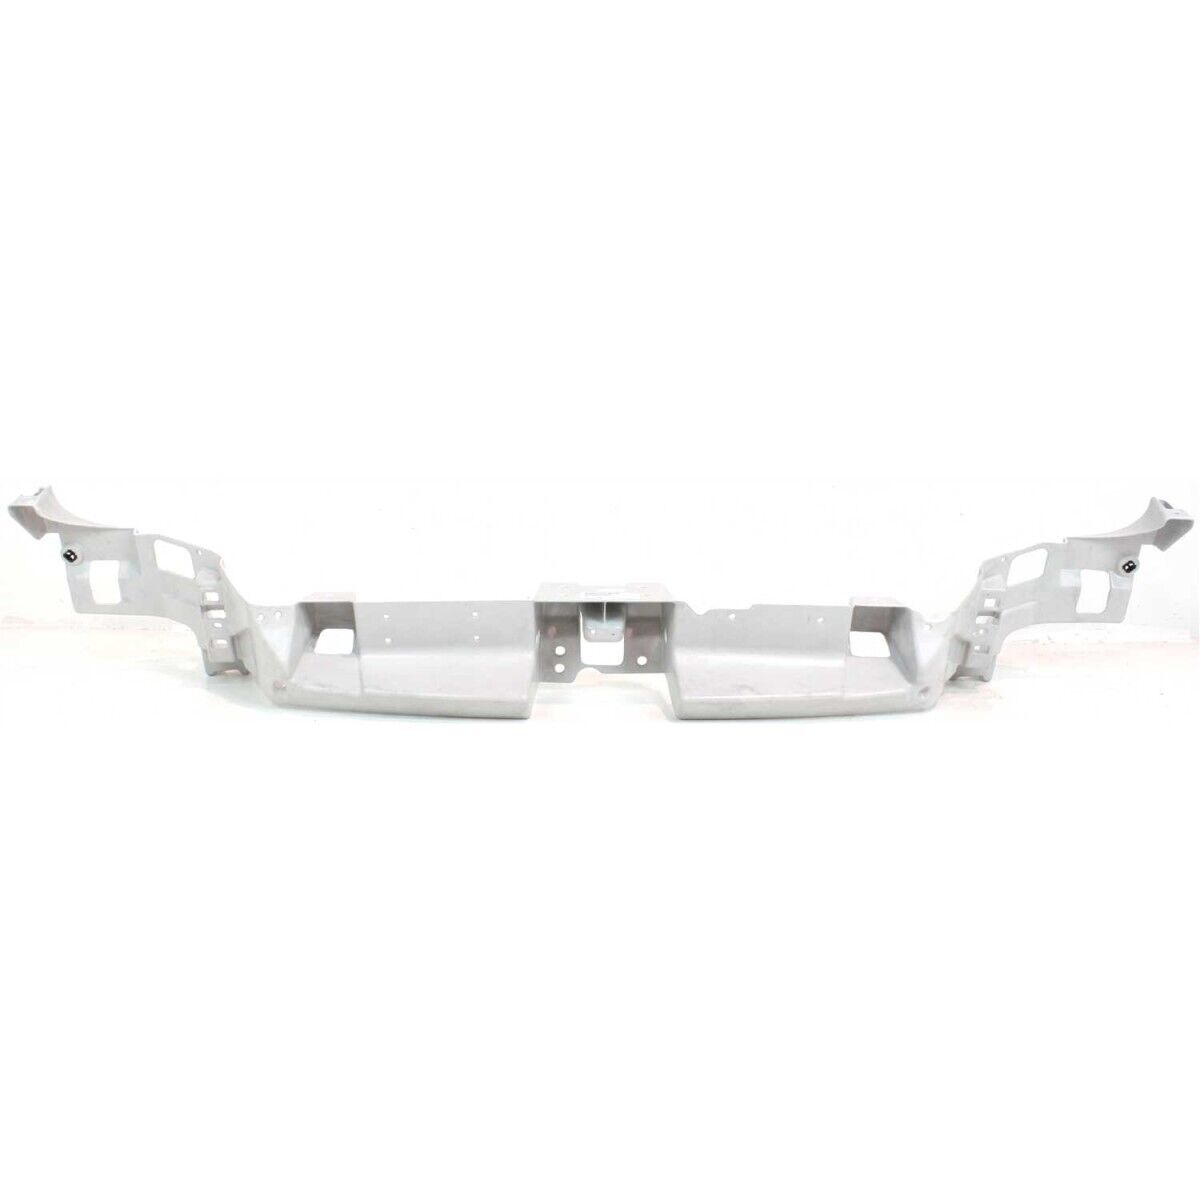 Header Panel  10321760 for Buick Rendezvous 2002-2007